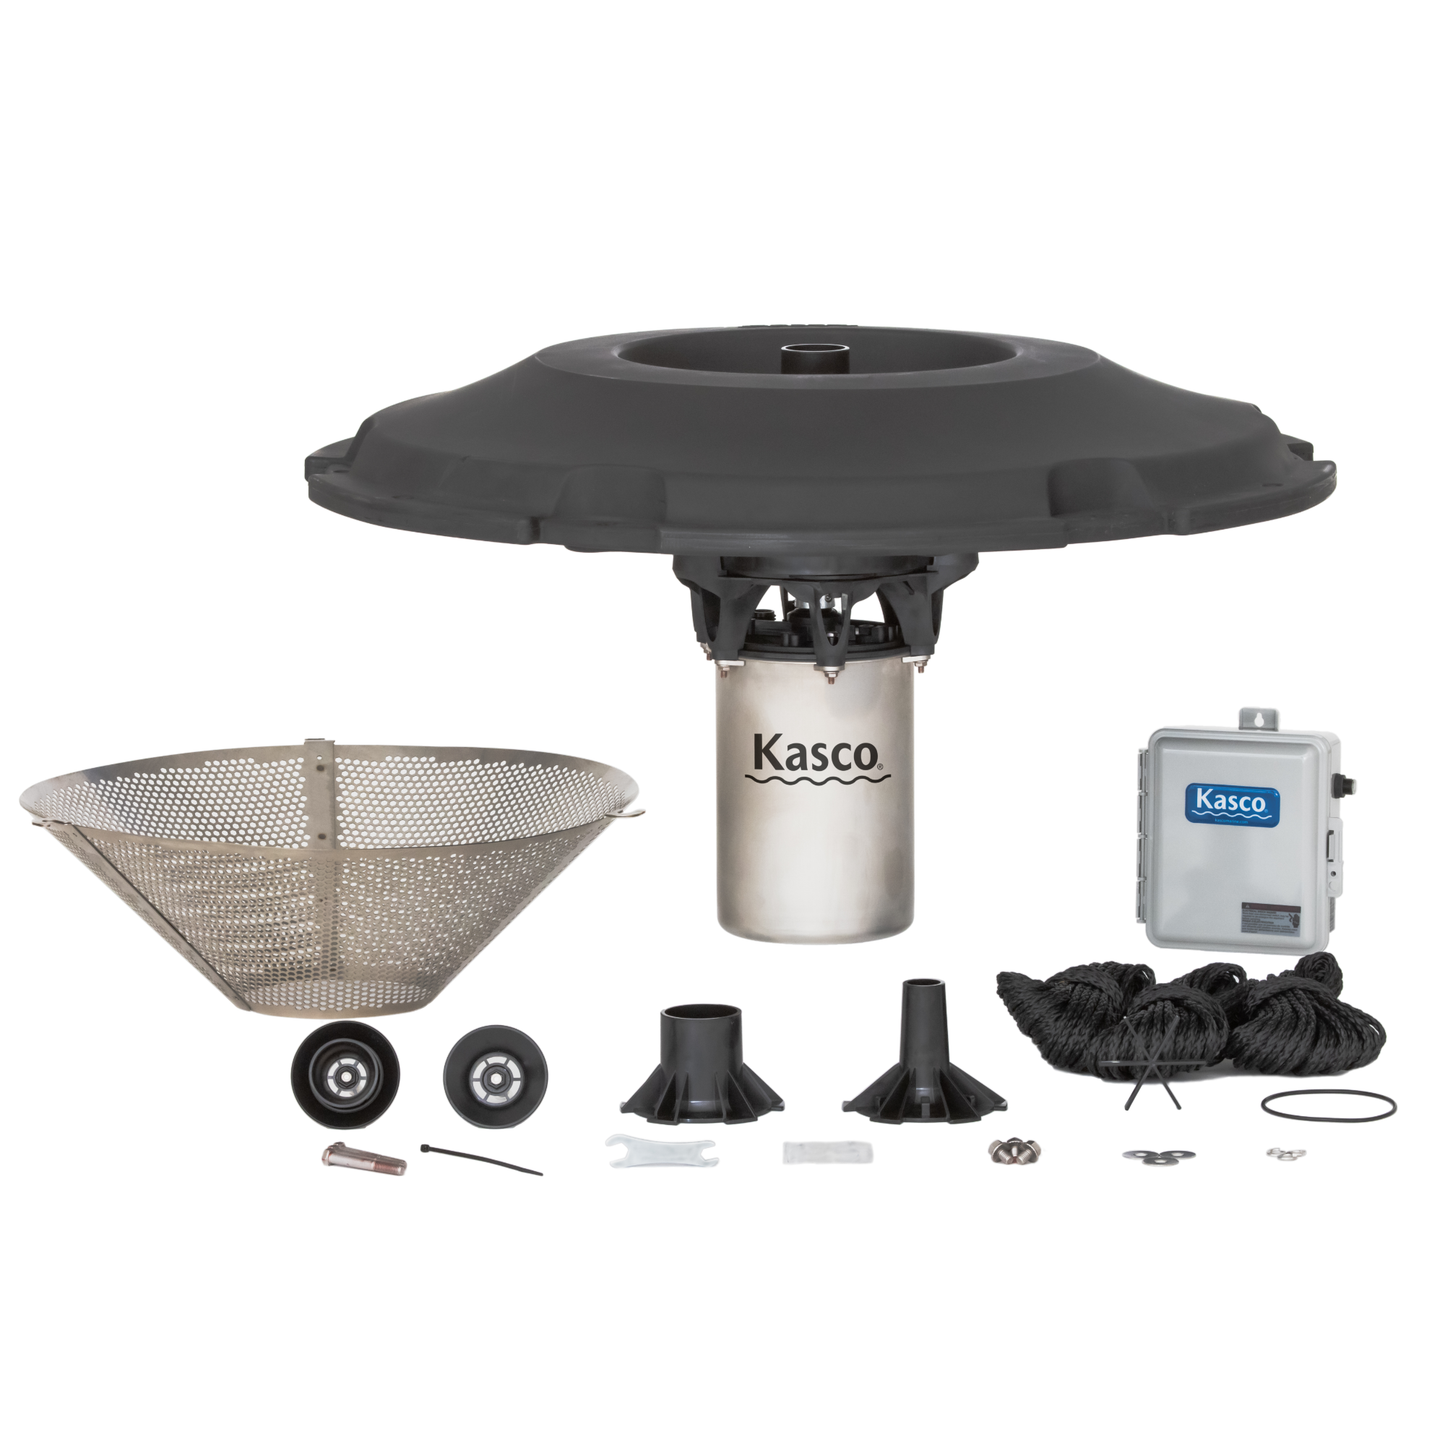 Kasco 3.1JF 3HP Decorative Pond Fountain - 230v - Living Water Aeration